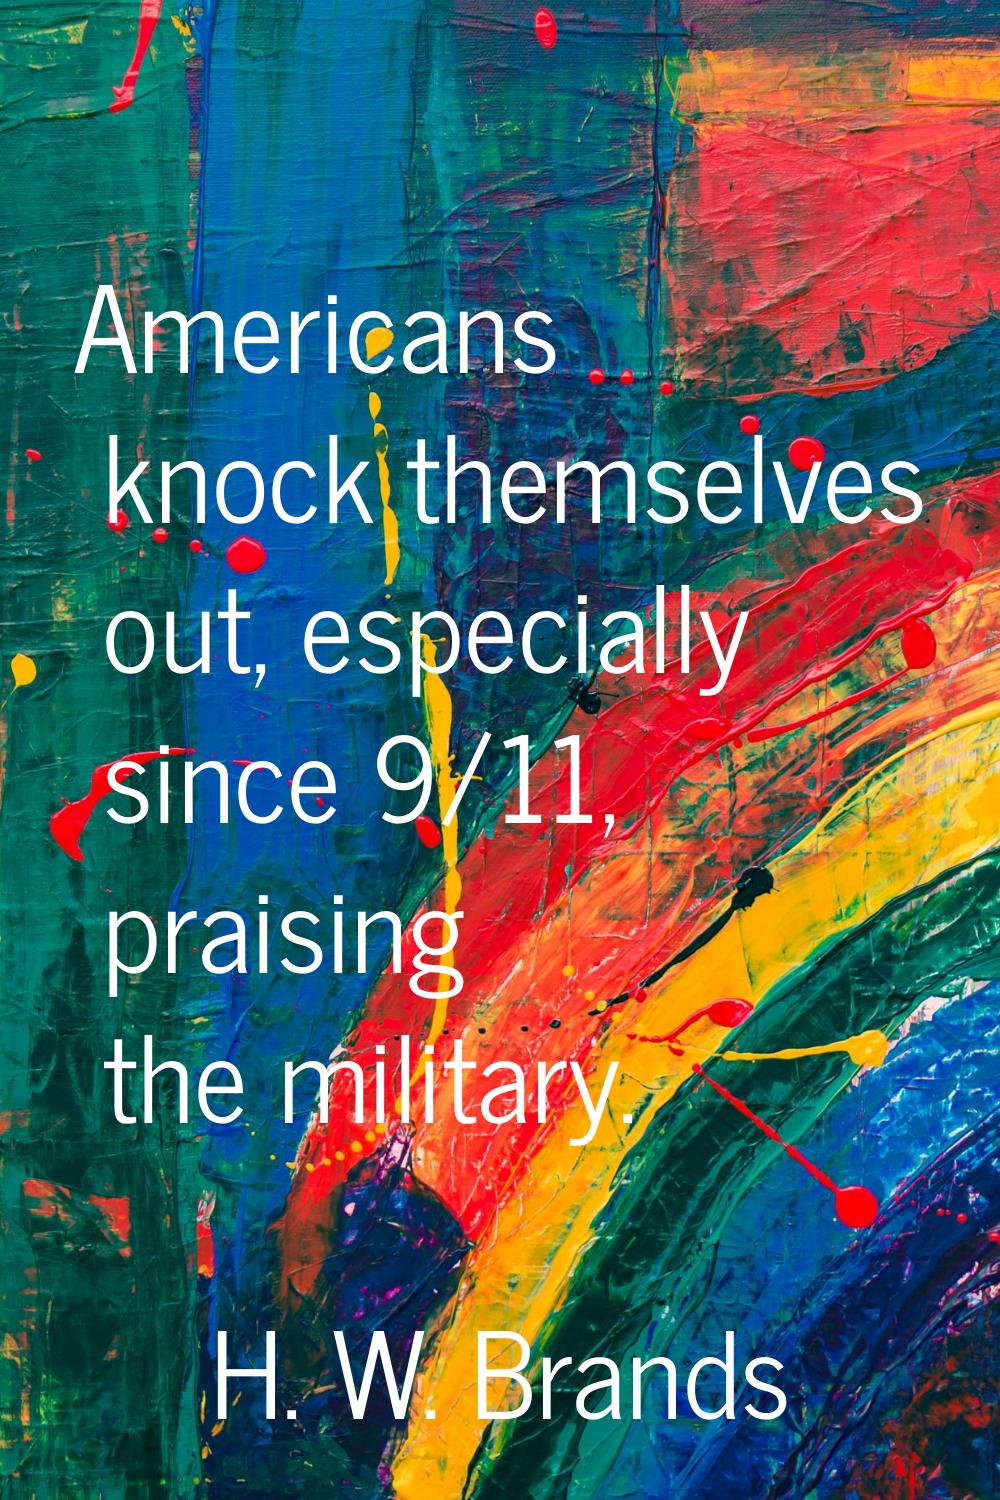 Americans knock themselves out, especially since 9/11, praising the military.